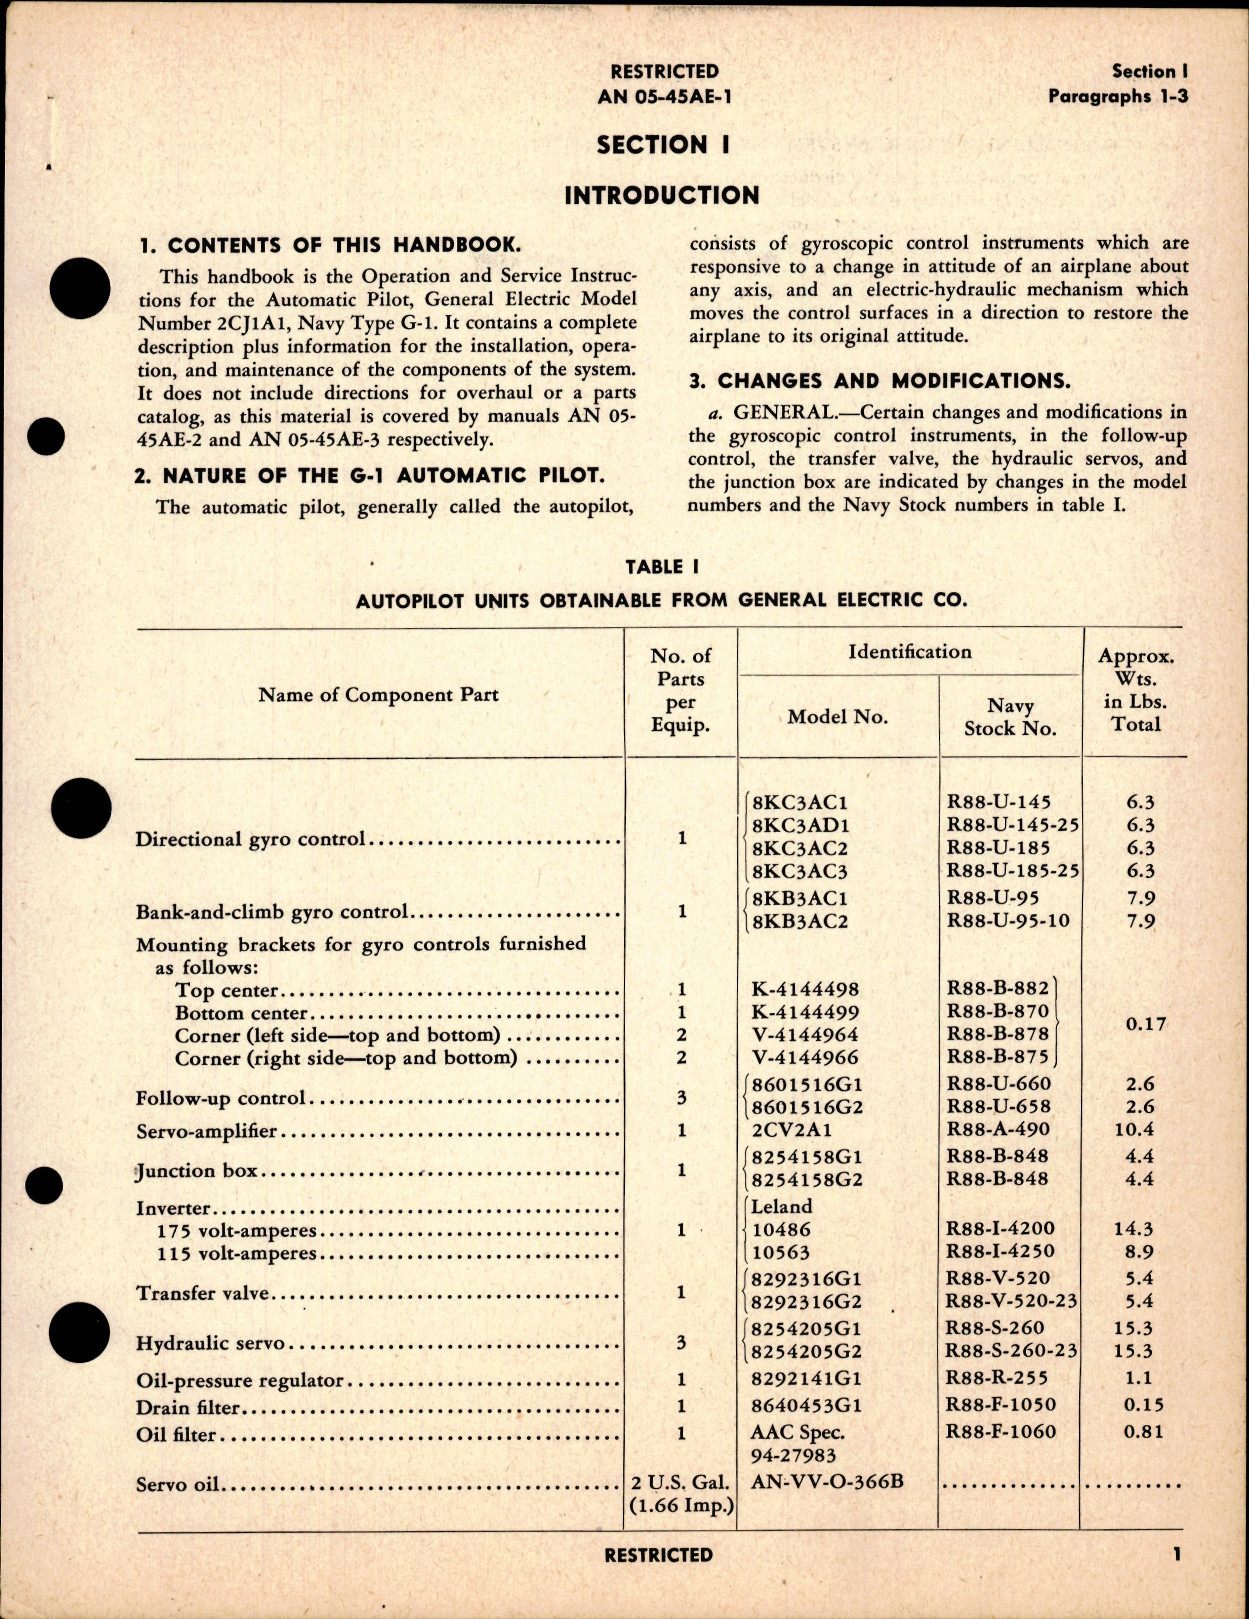 Sample page 5 from AirCorps Library document: Operation and Service Instructions for Automatic Pilot Type G-1, G.E. Model 2CJ1A1